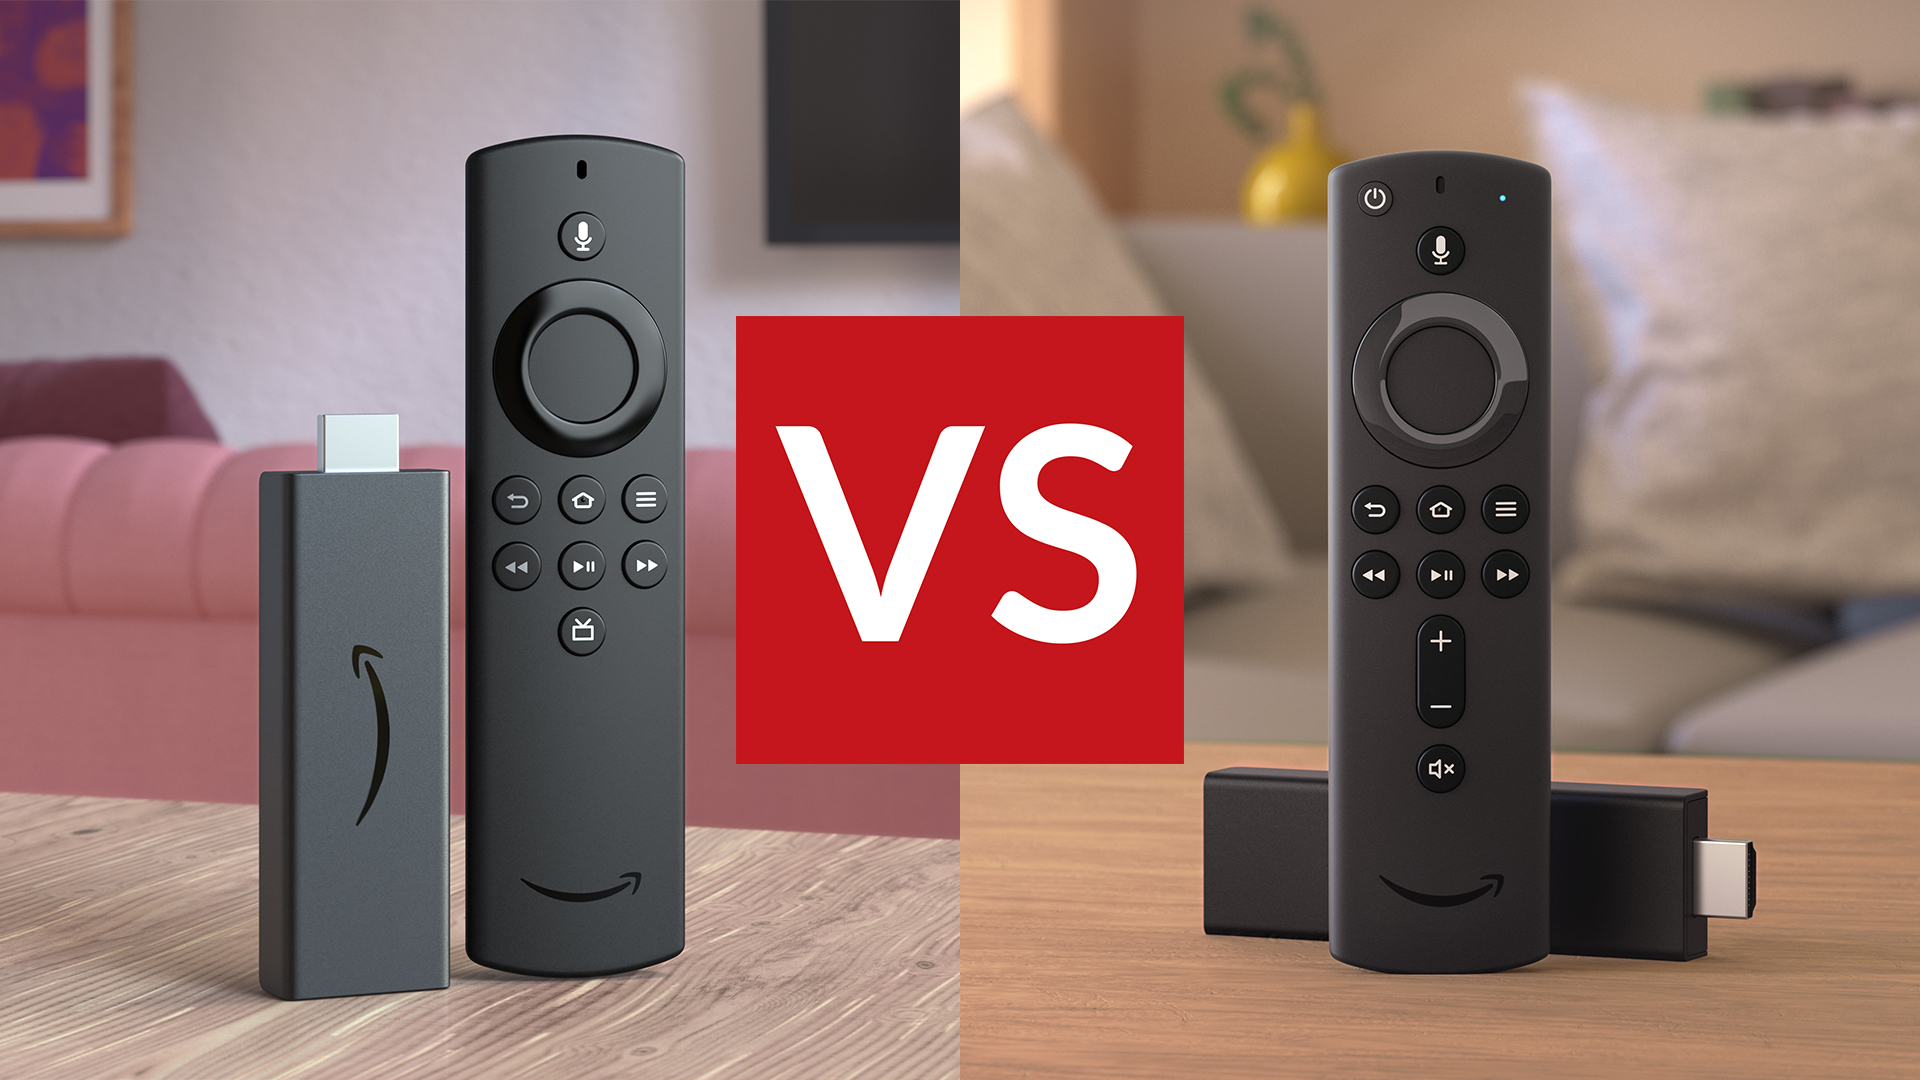 Fire TV Stick (2020) review